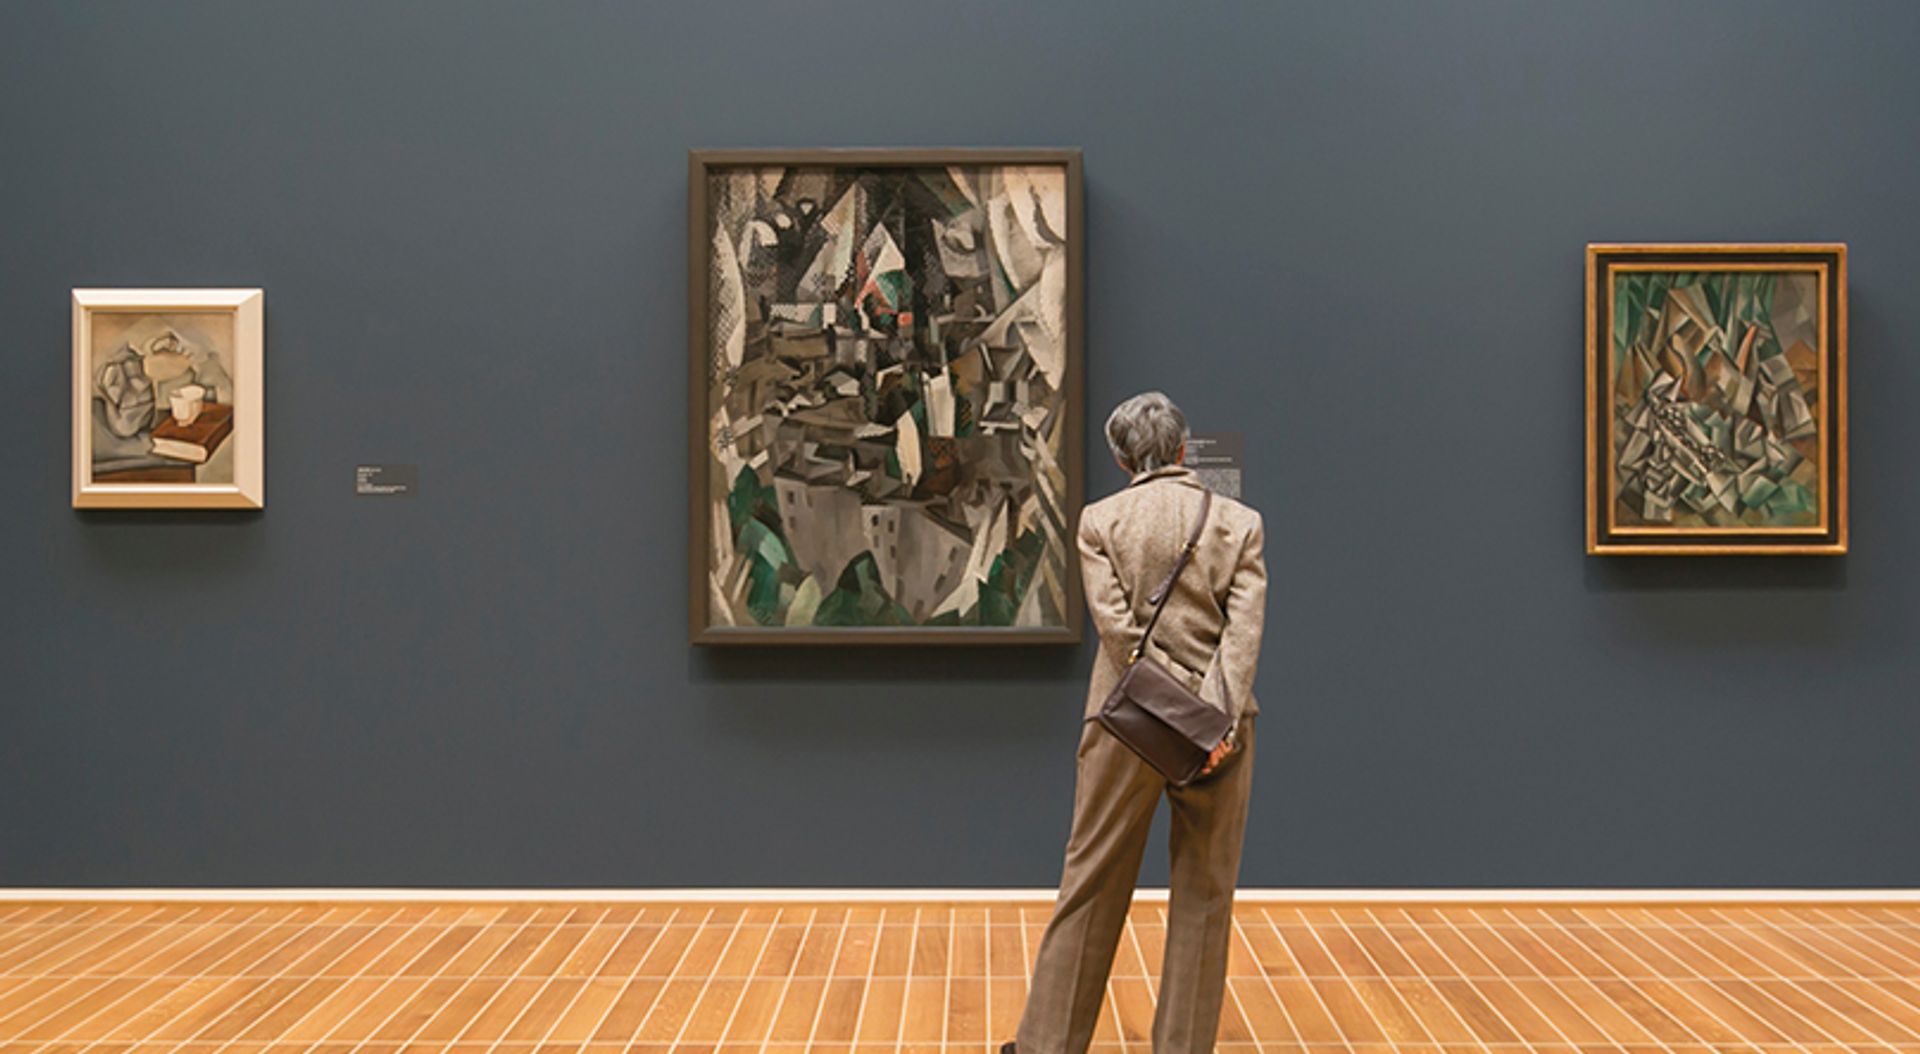 Installation view of The Cubist Cosmos: from Picasso to Léger, Kunstmuseum Basel © Julian Salinas